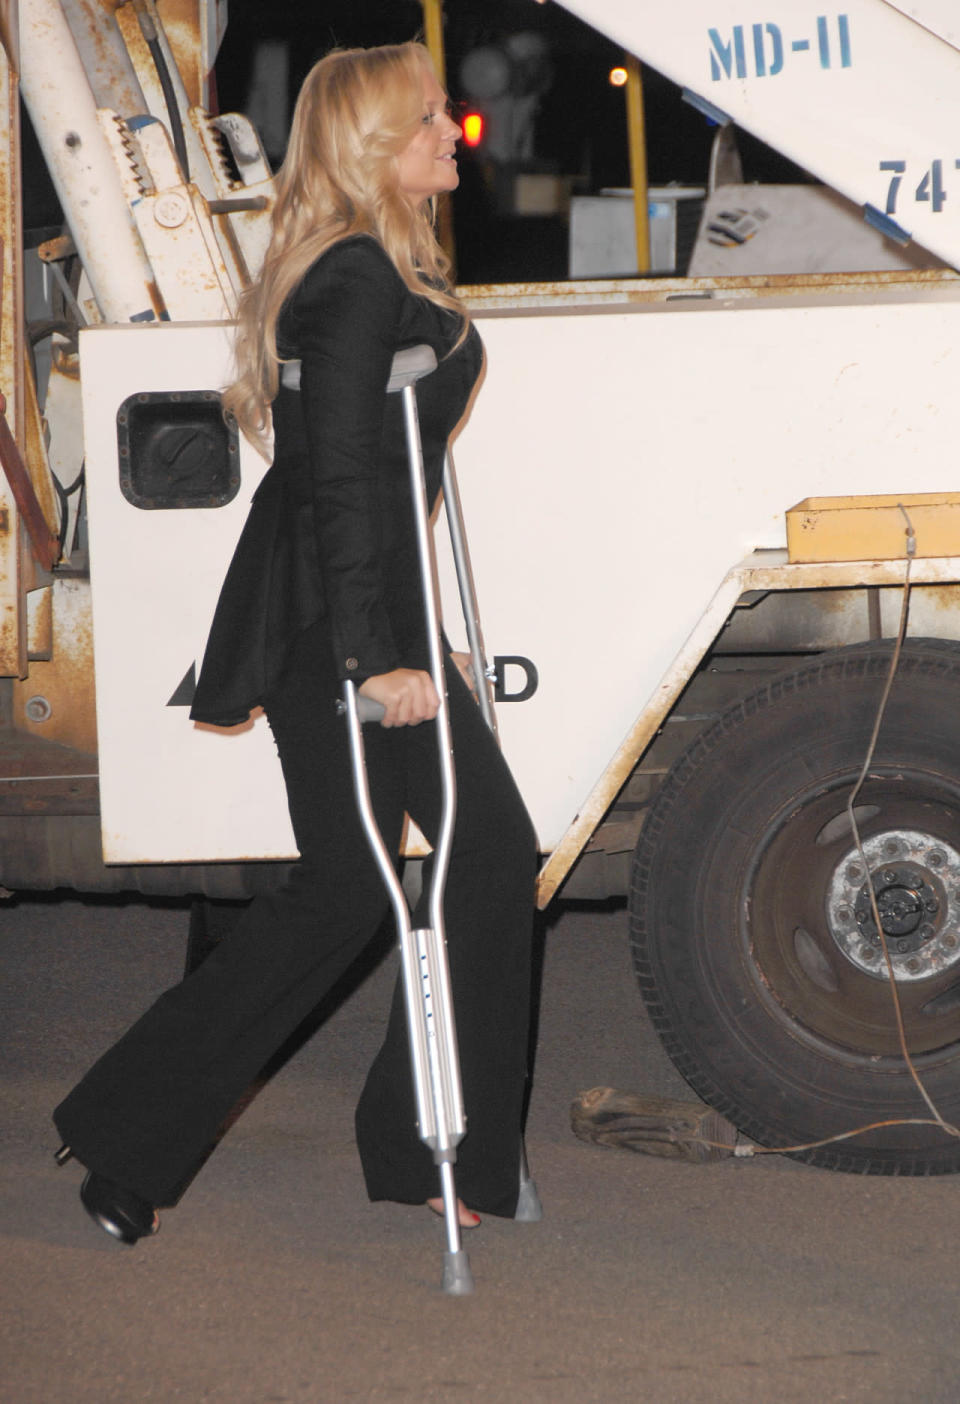 Emma Bunton in a black pantsuit, a single heel, and crutches.